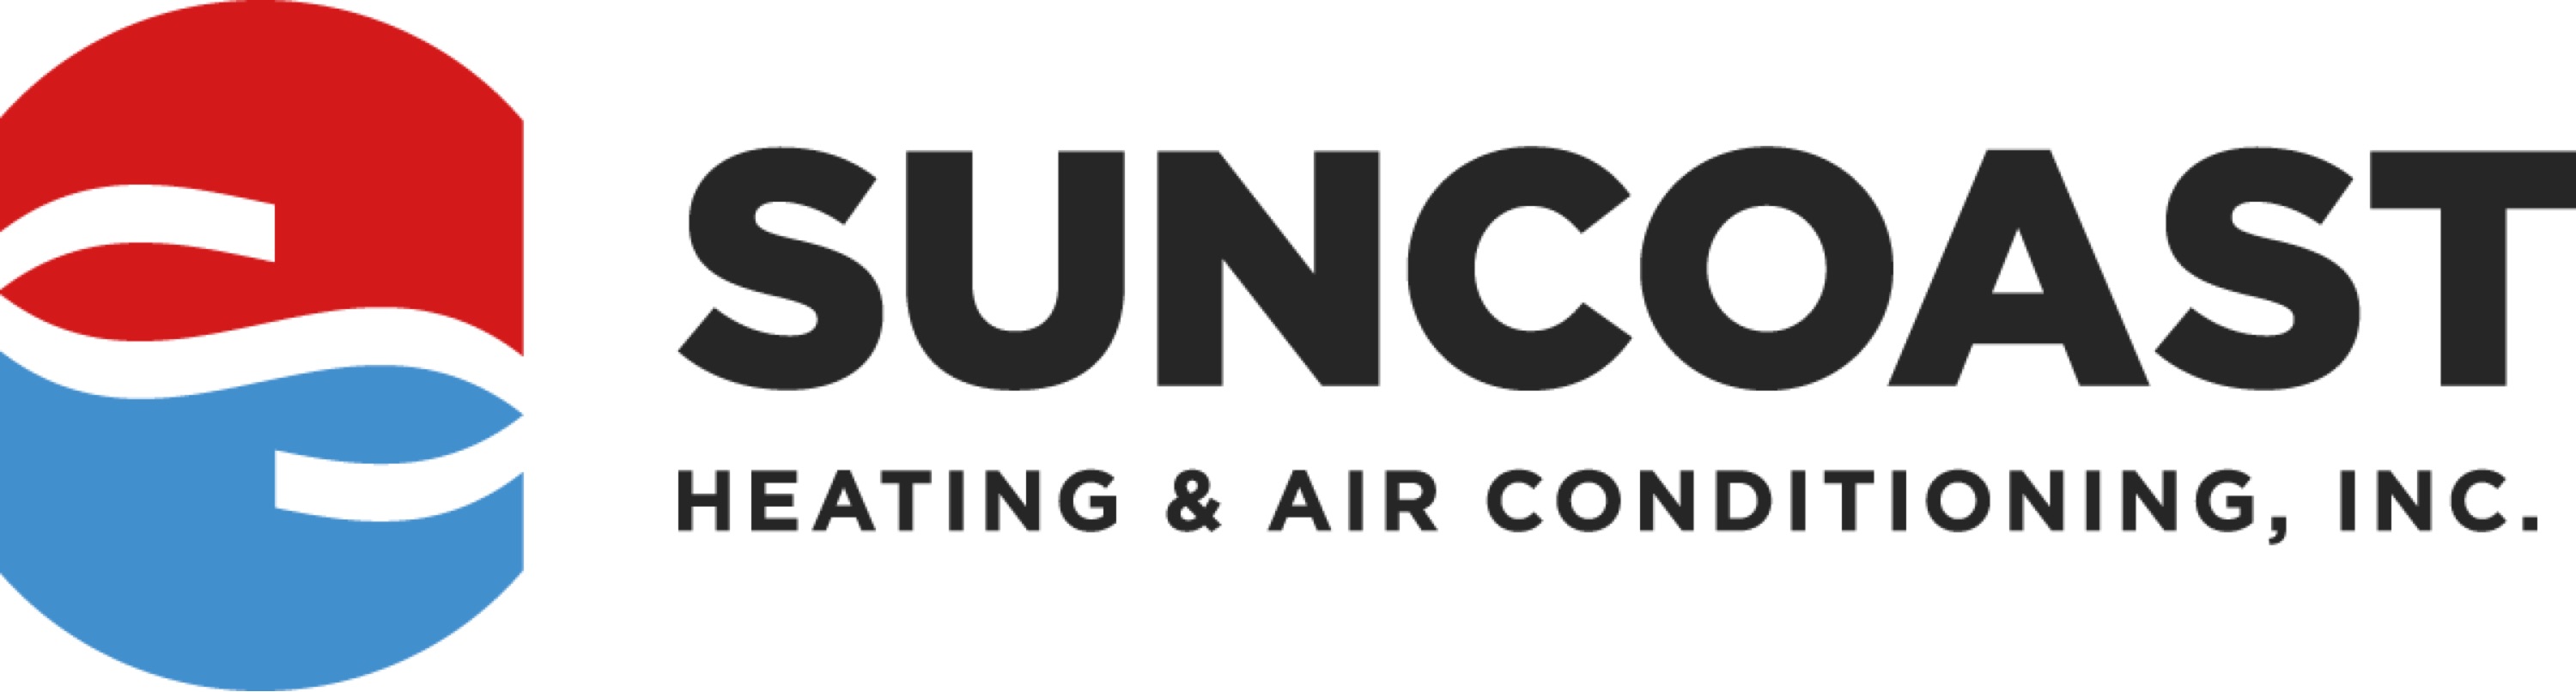 Suncoast Heating and Air Conditioning, Inc. Logo